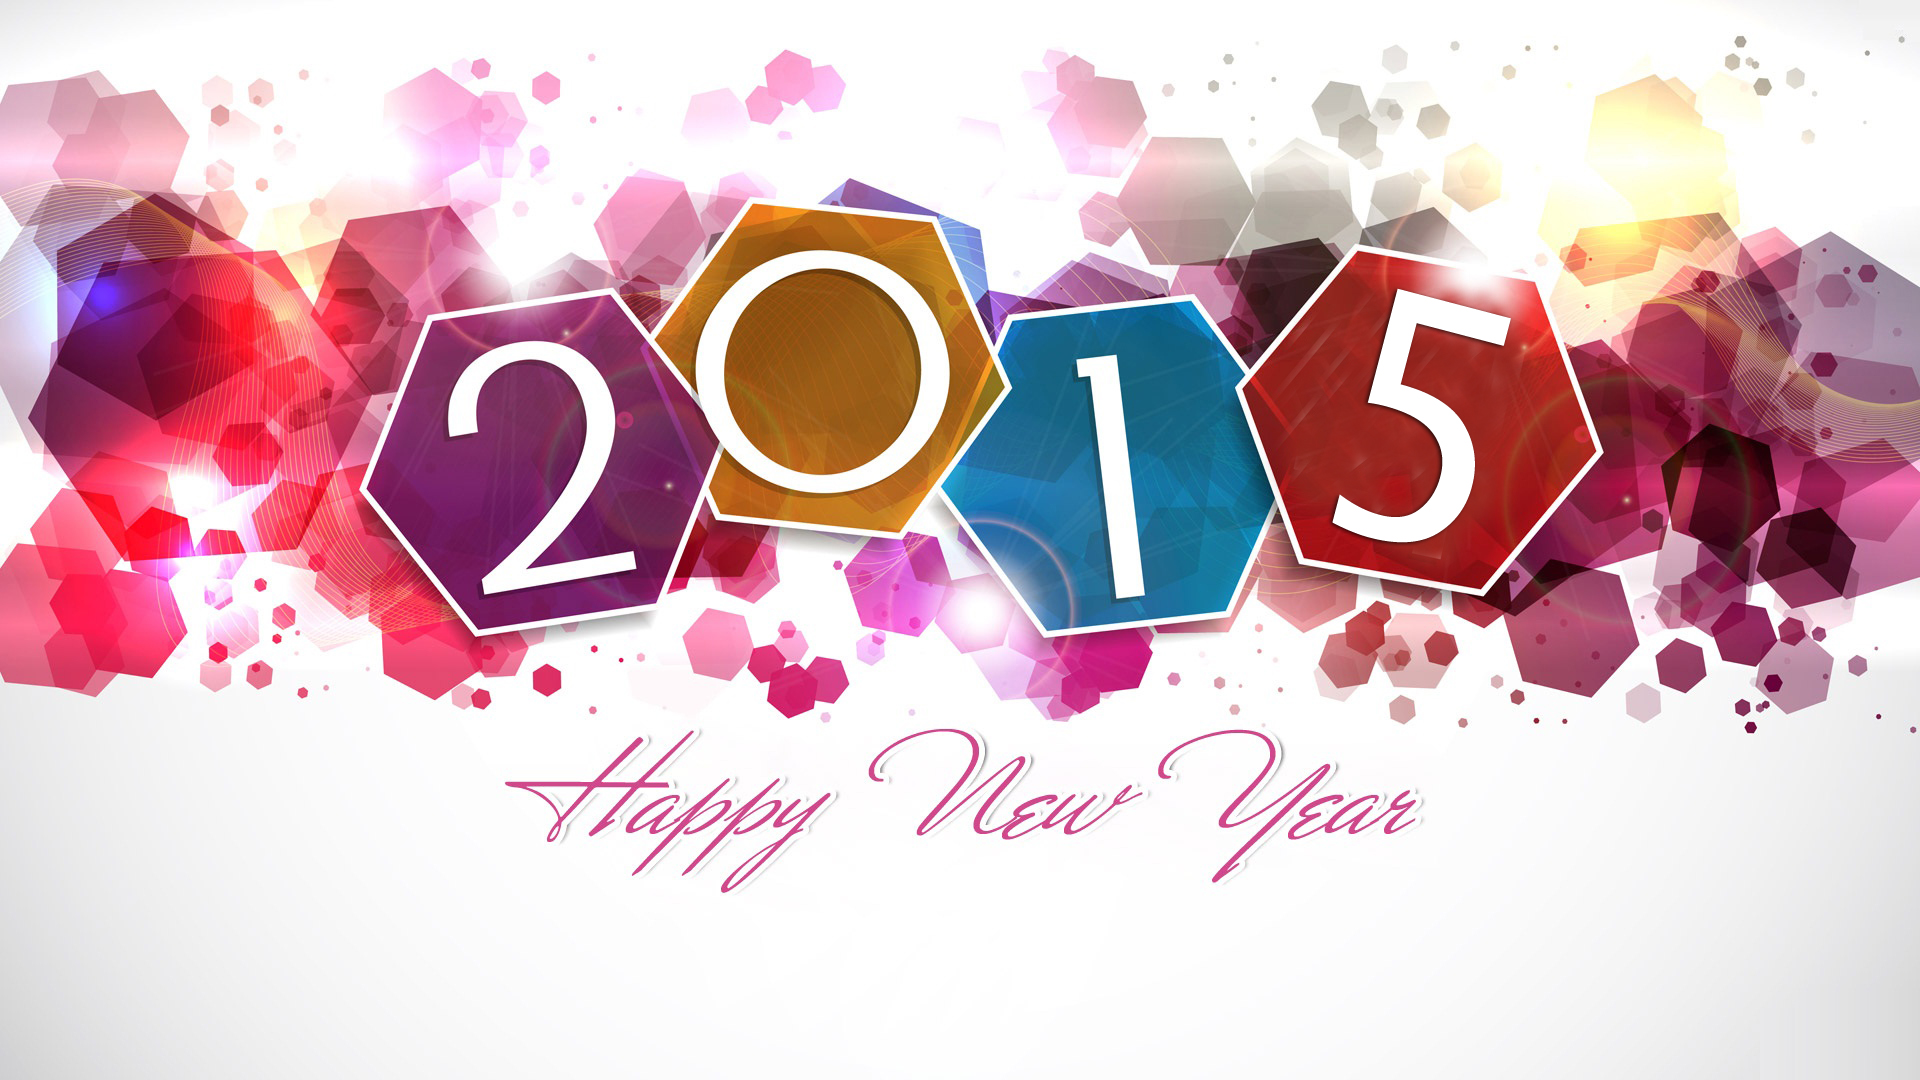 Happy New Year SMS New Year 2015 Quotes wallpapers